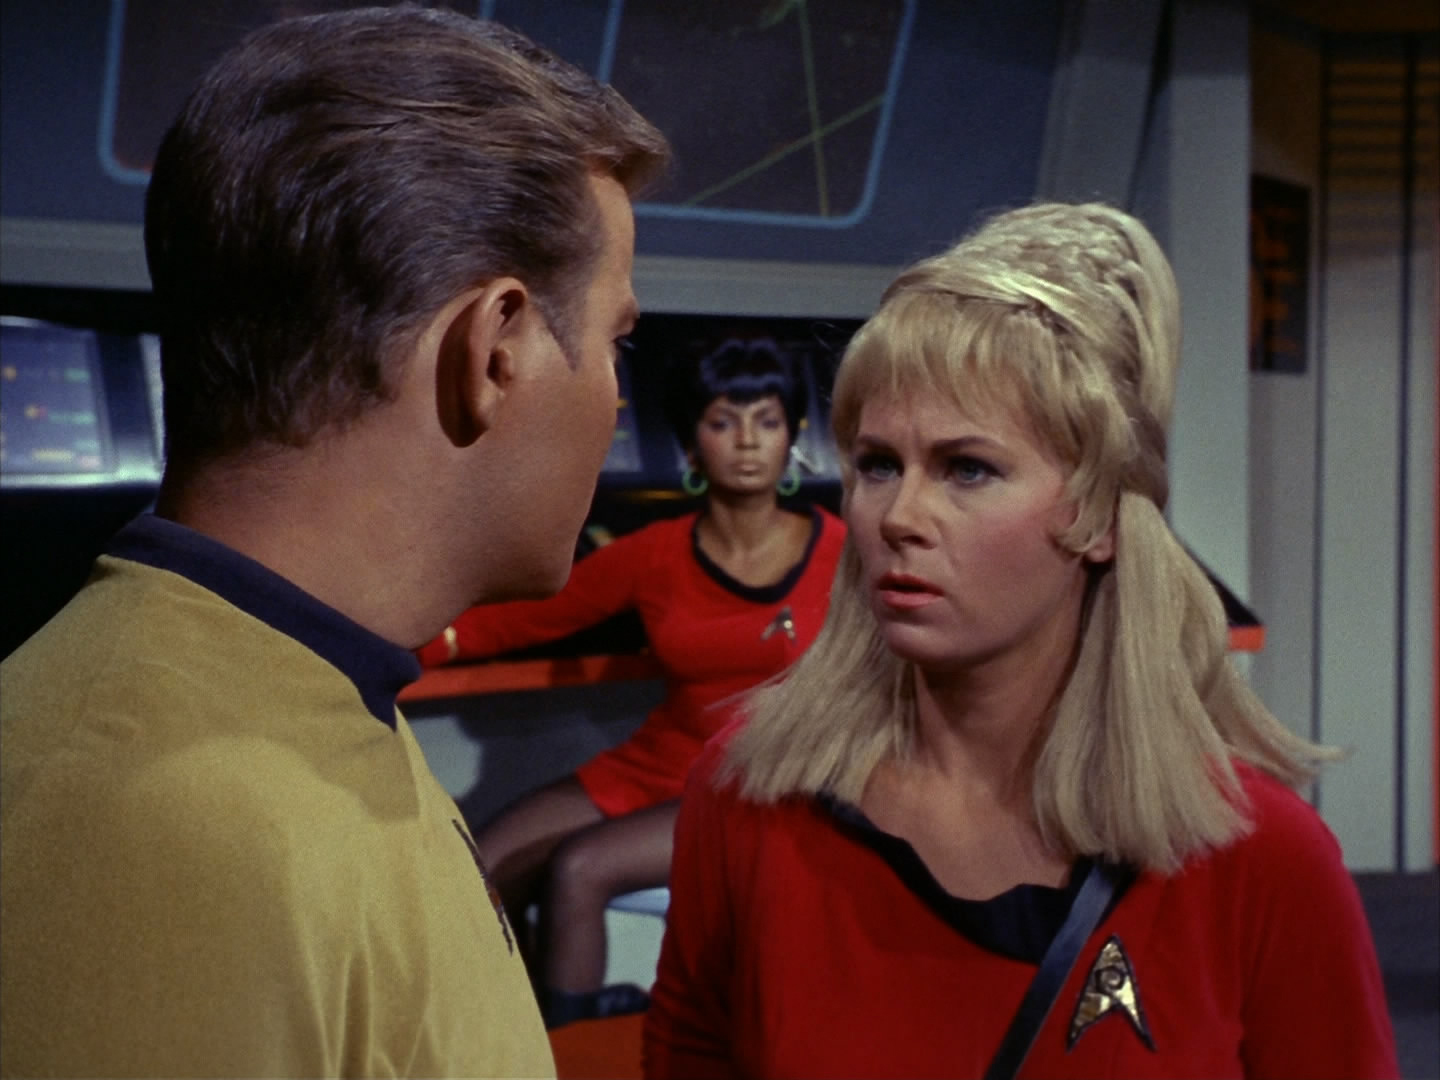 janice rand, images, image, wallpaper, photos, photo, photograph, gallery, ...